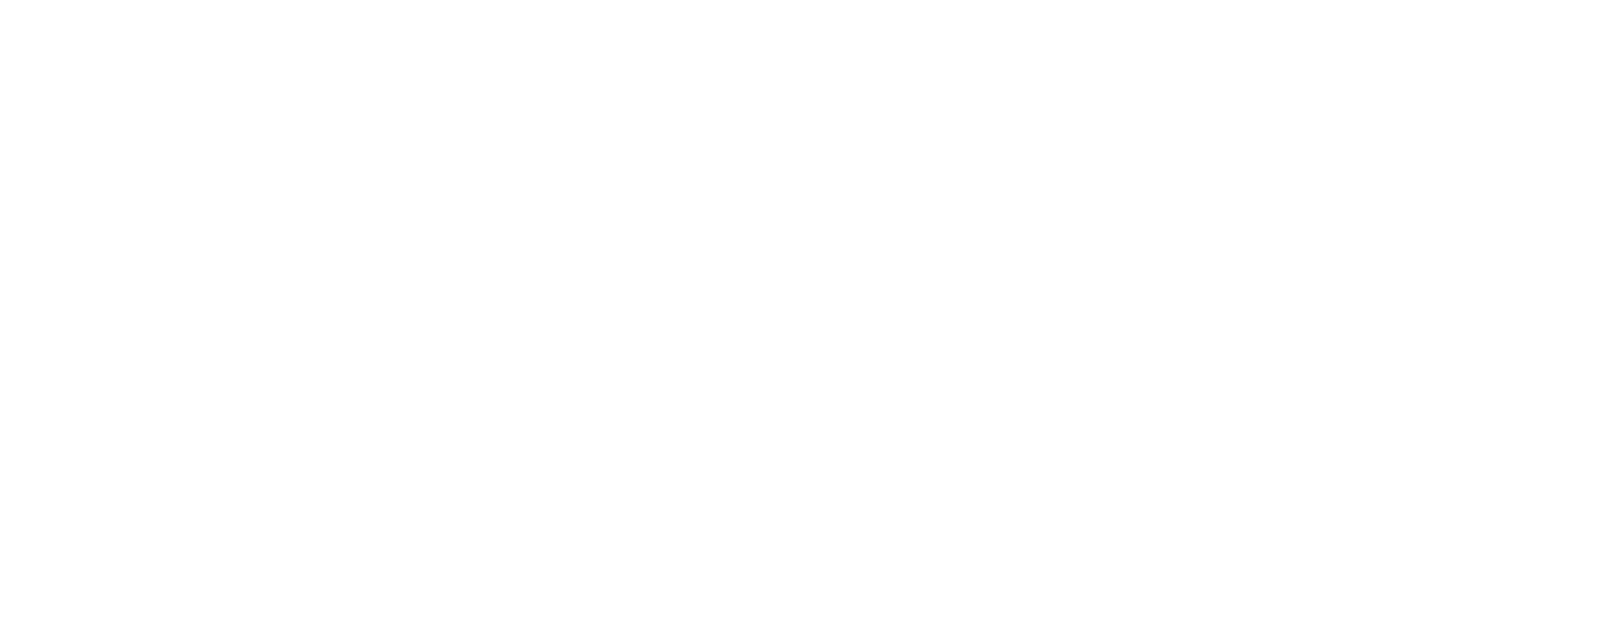 Mate Group Oy